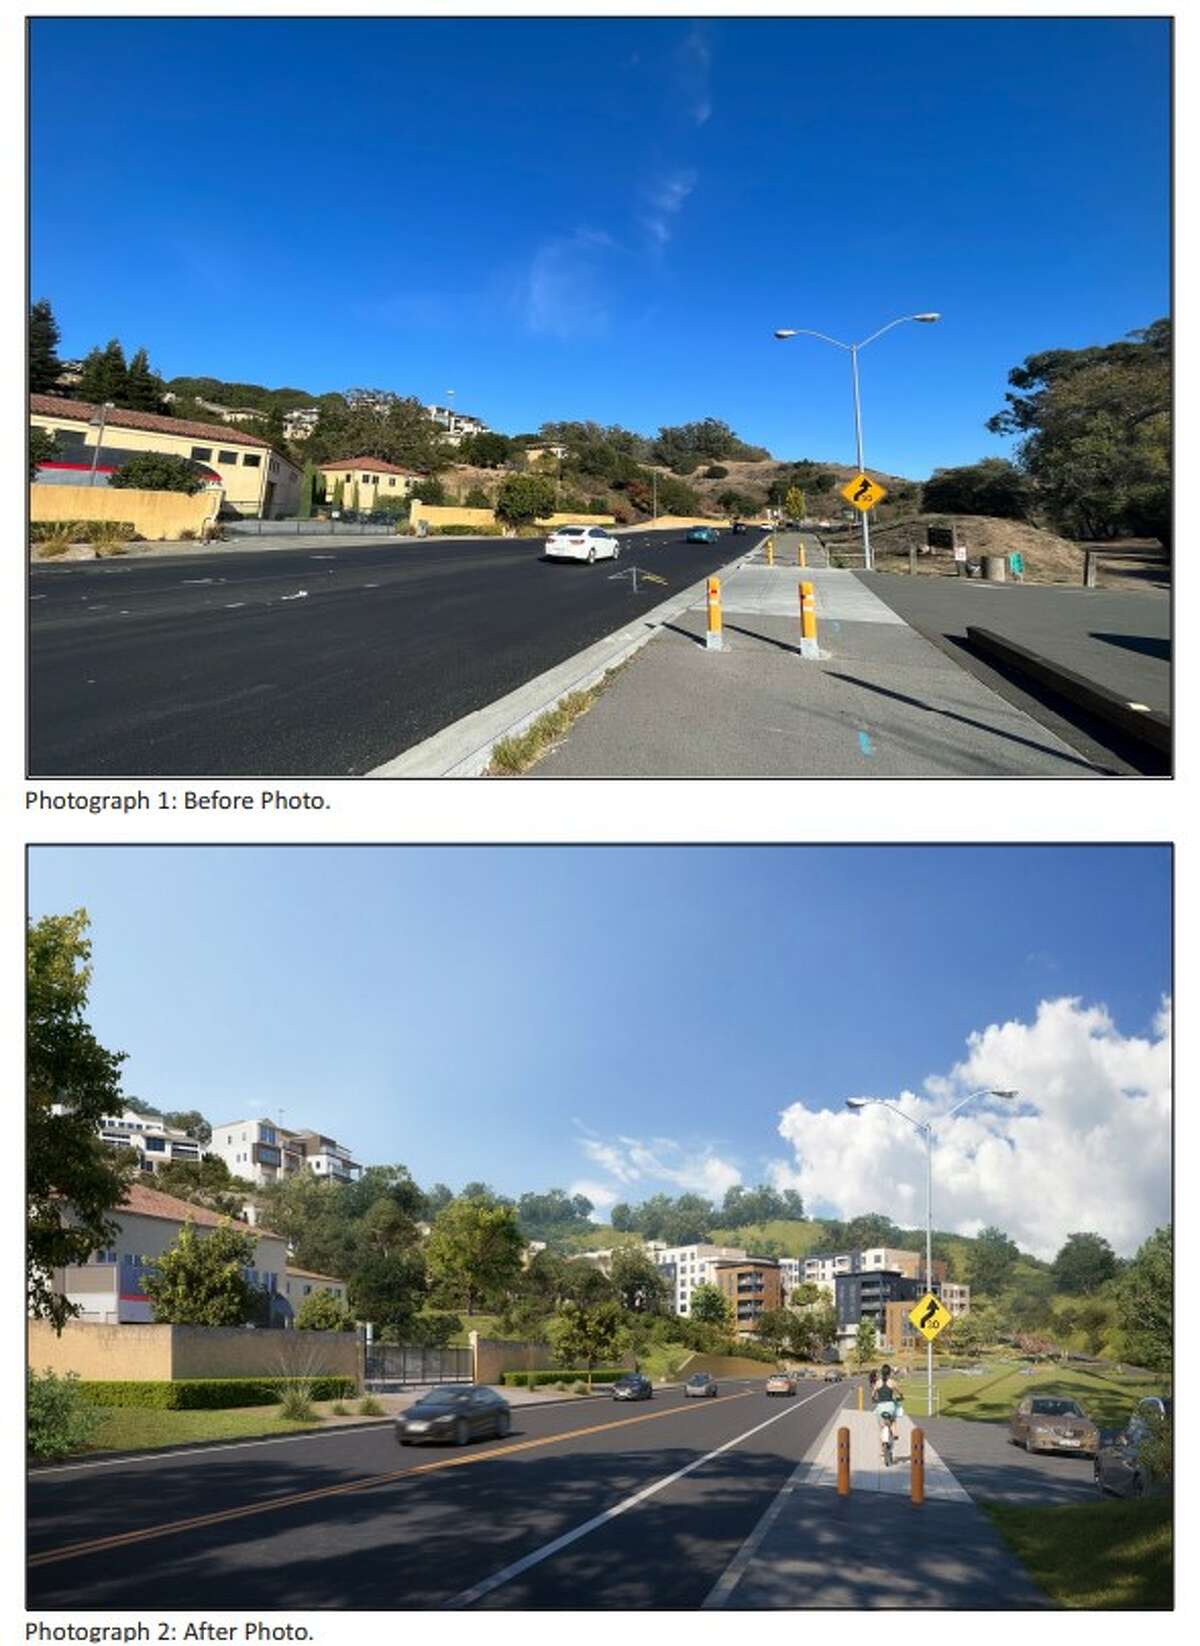 Before-and-after rendering photos show the approach from the east on Sir Francis Drake Boulevard to Oak Hill Apartments, a proposed affordable housing development in Marin County.